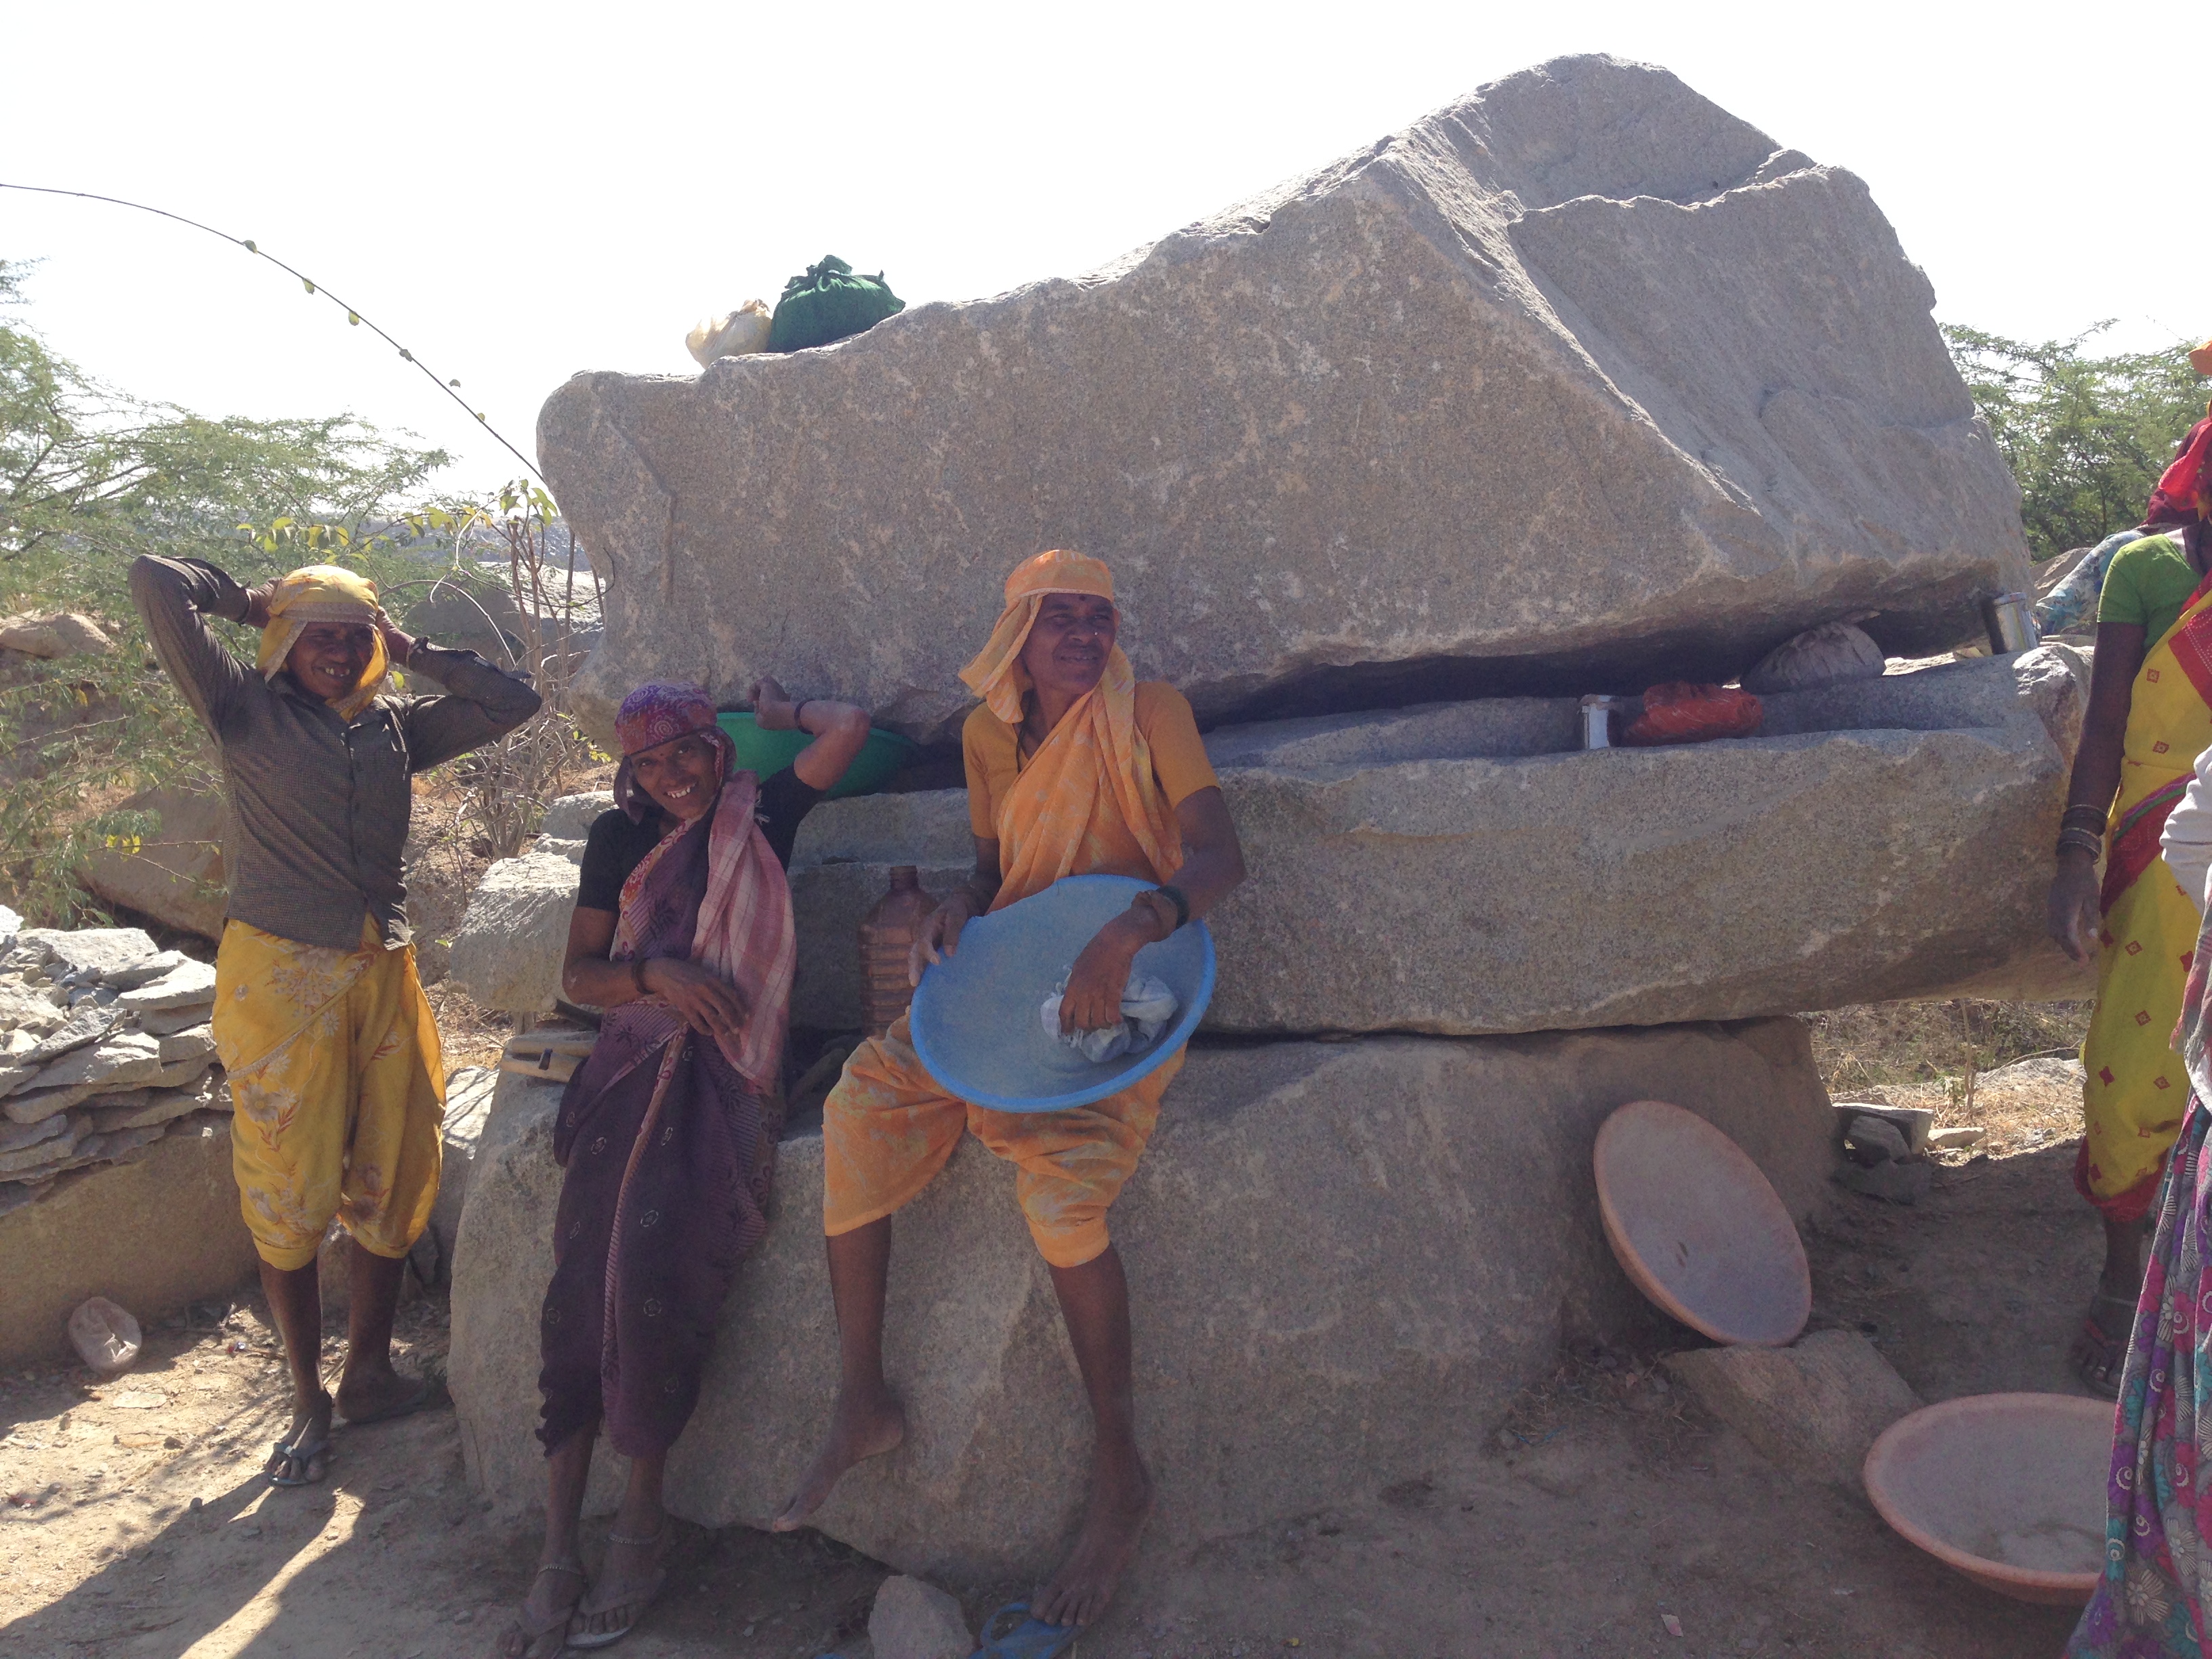 Next steps towards child labour free natural stone in India